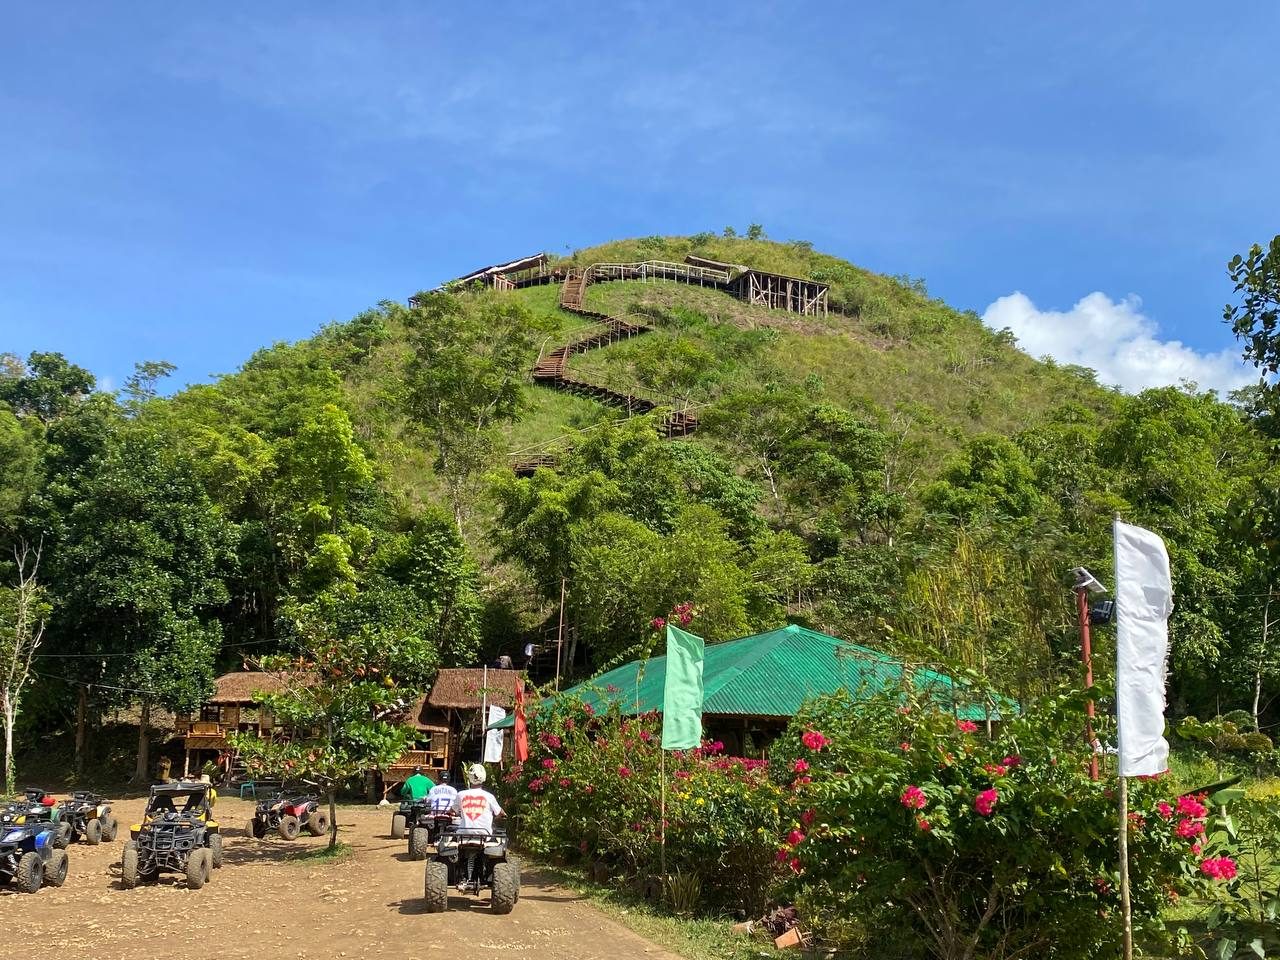 Bohol provincial gov’t looking into 2 other tourist attractions built on Chocolate Hills